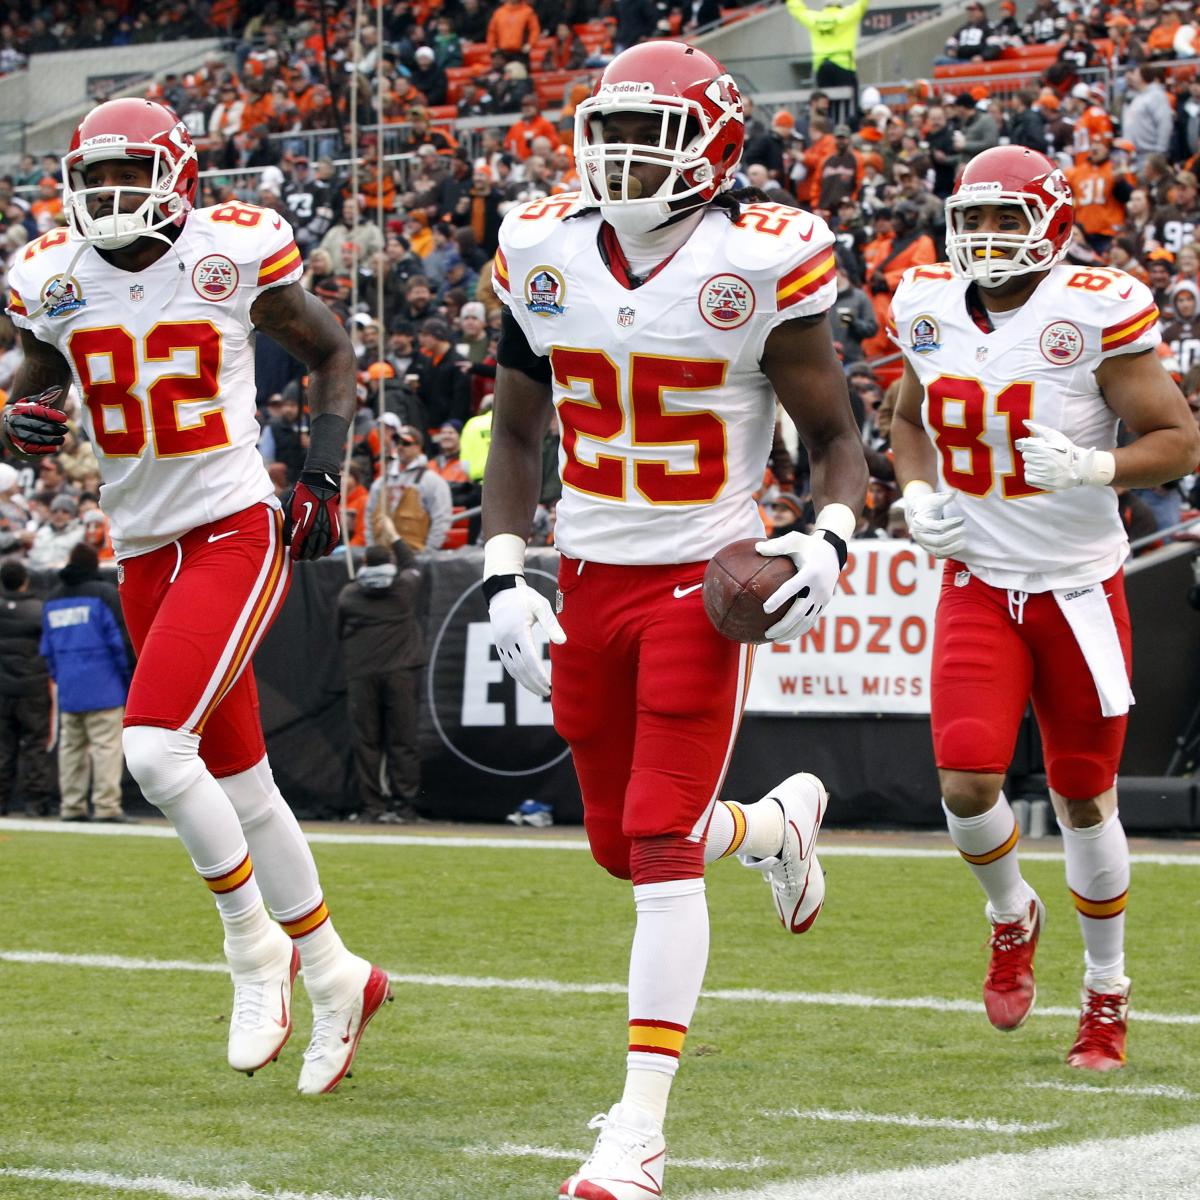 Chiefs' Offseason Moves Will Make Jamaal Charles NFL's Most Dangerous